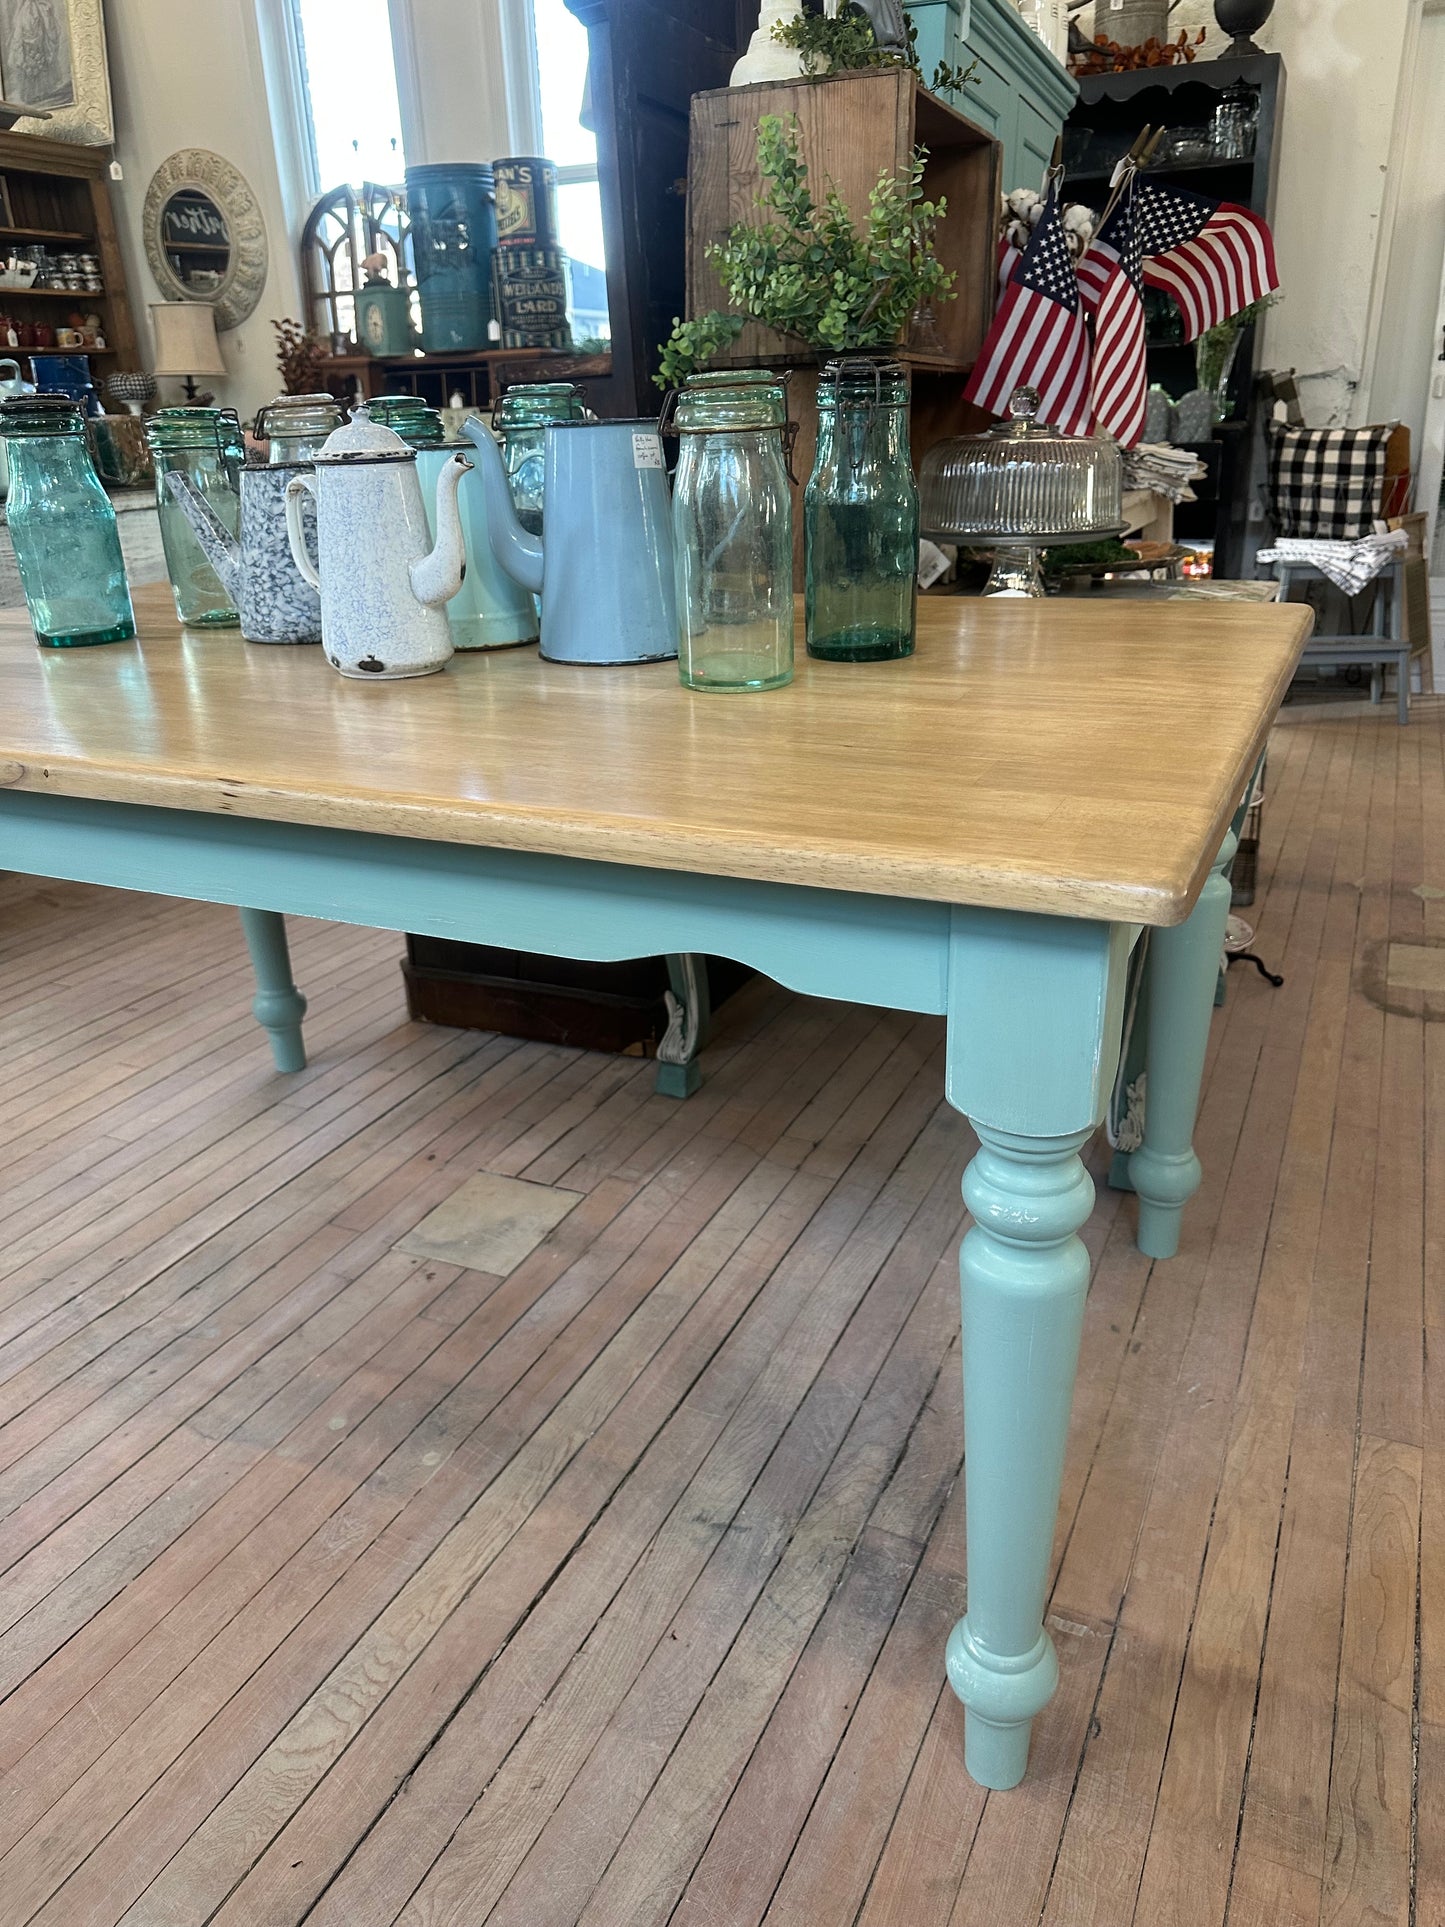 Vintage English Country Farm table with drawer - Solid Wood - Refinished (60x36x30)